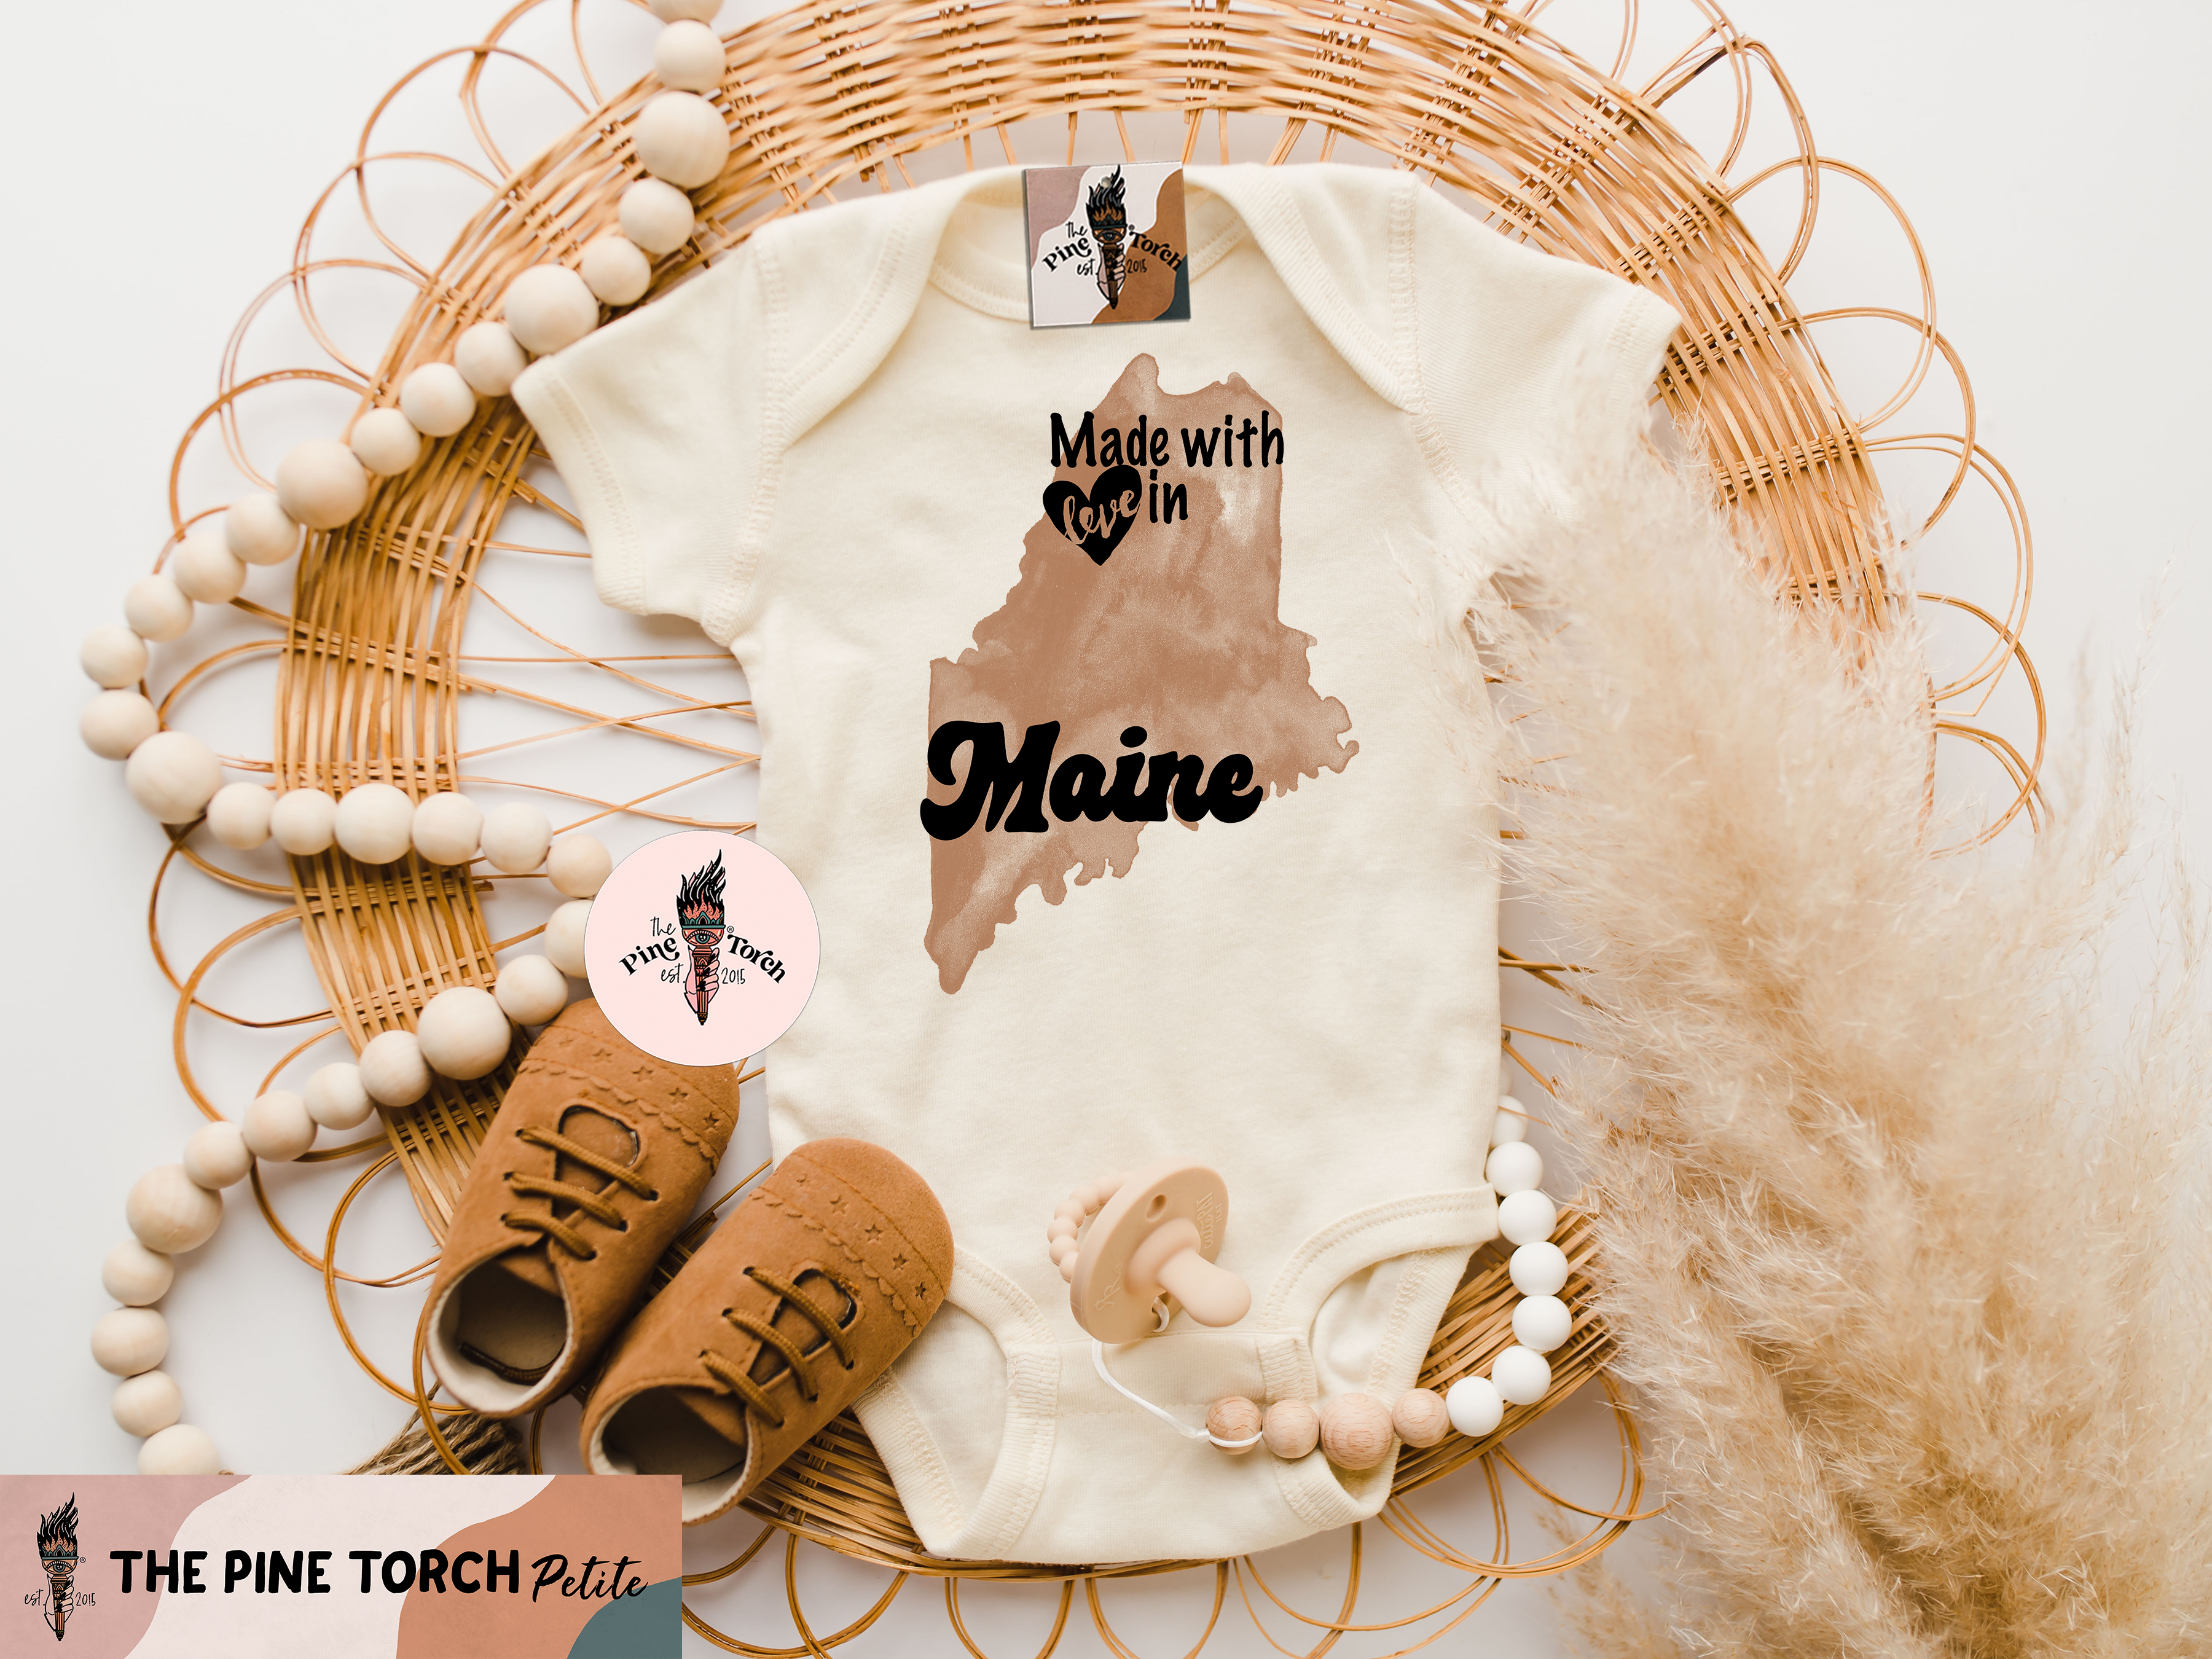 « MADE WITH LOVE IN MAINE » BODYSUIT